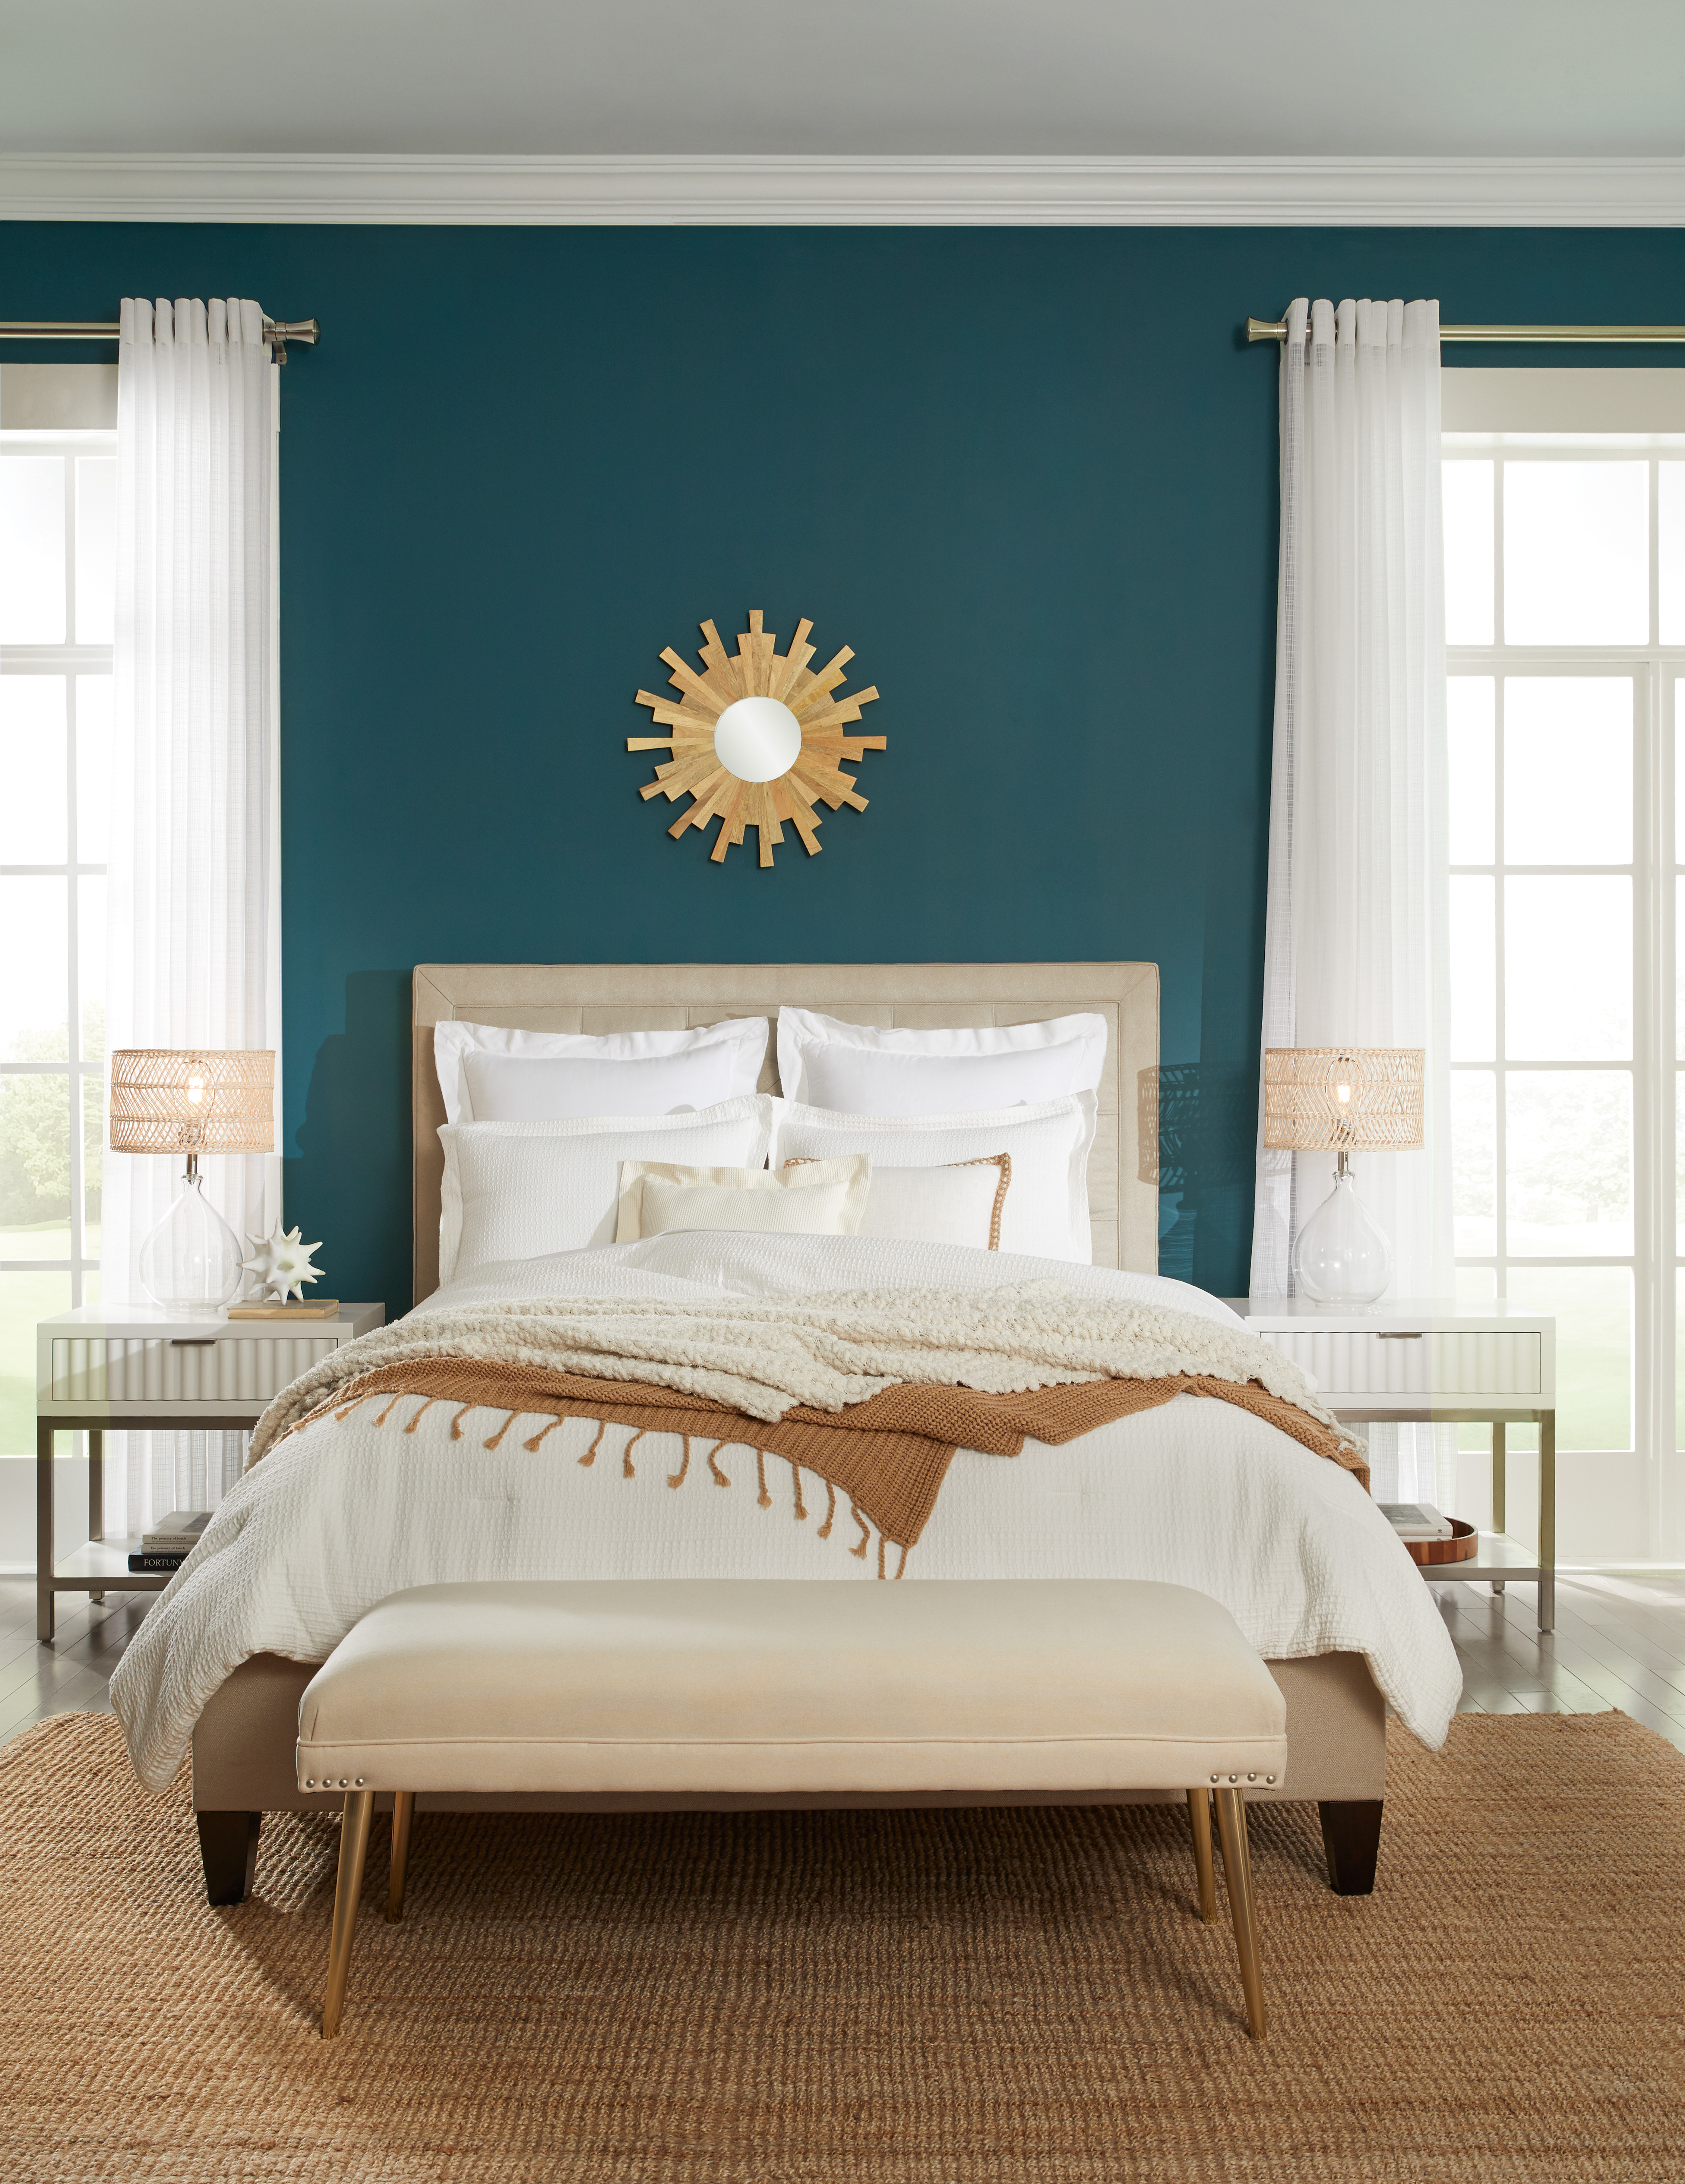 A bedroom with dark  teal color walls and white trim and ceiling, the color used on the wall is called Ocean Abyss. 
The bedroom is dresses in off white neutral bedding and a brown accent blanket.  